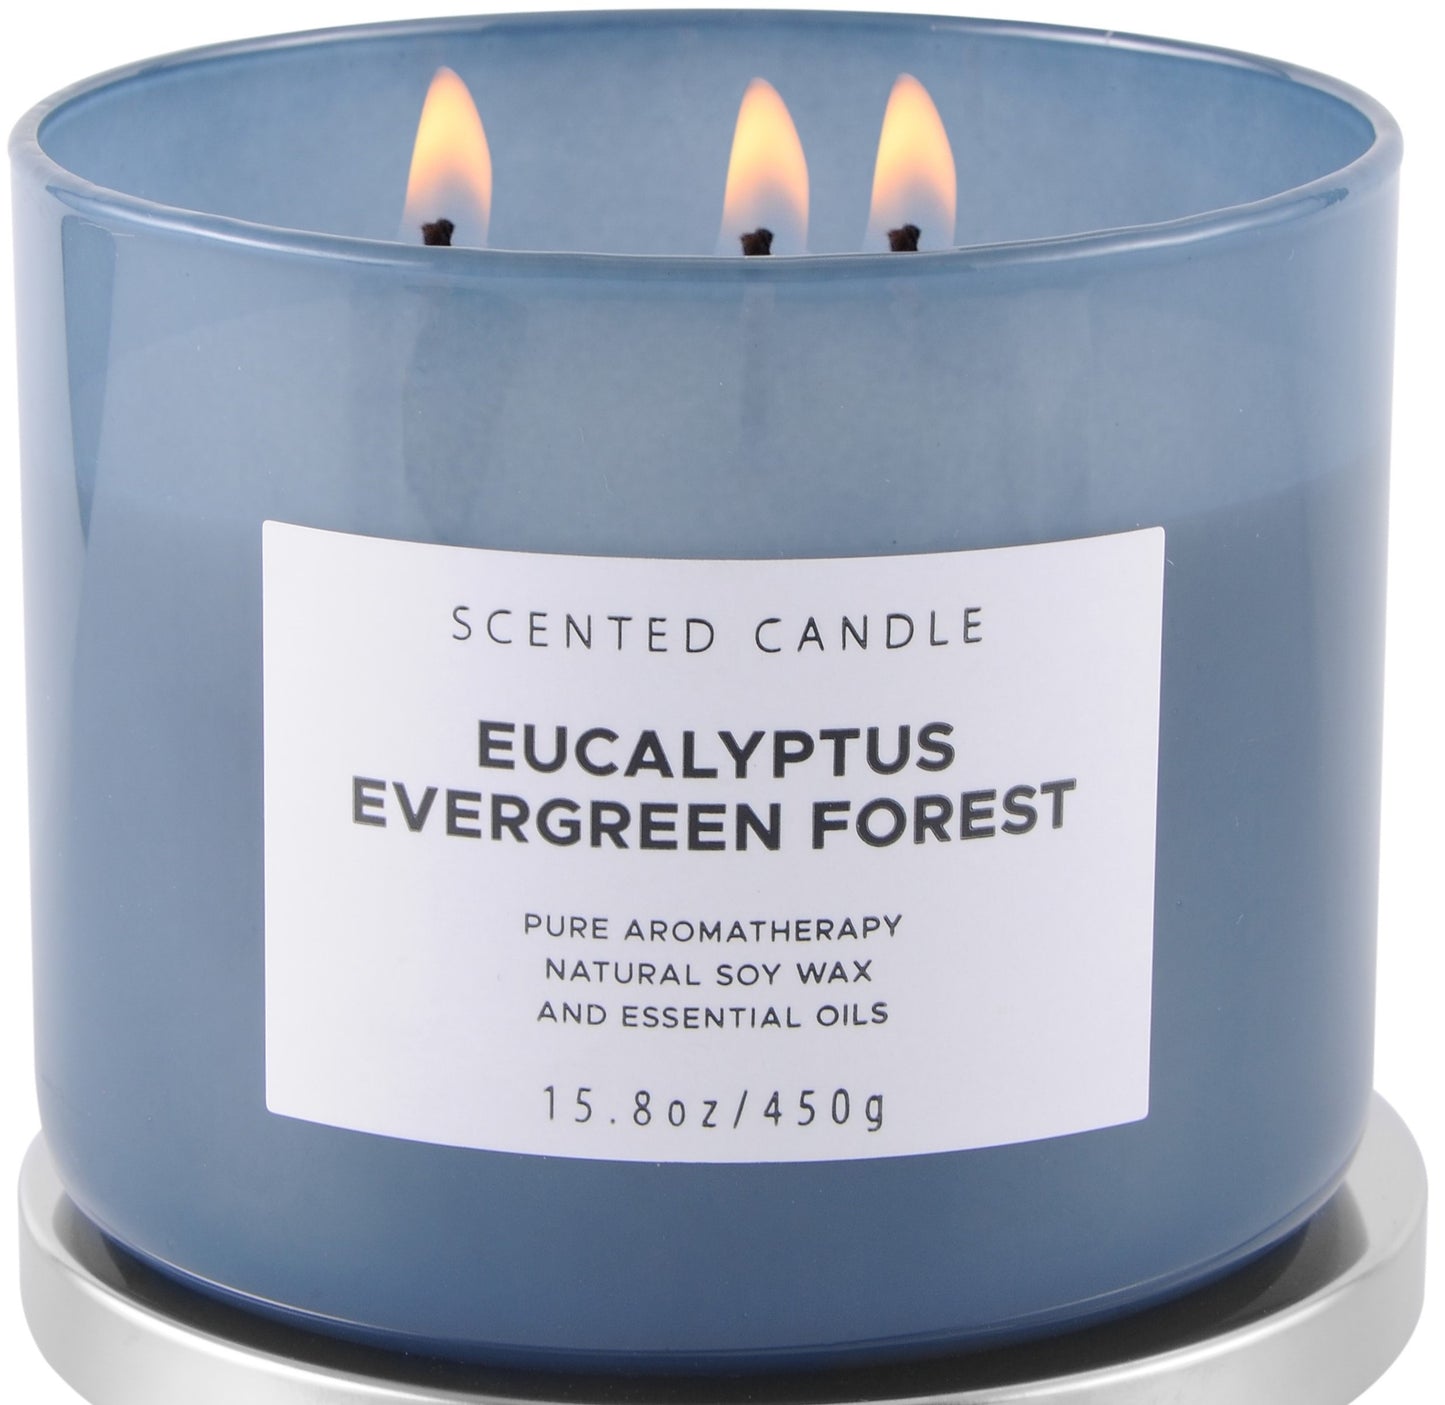 Eucalyptus Evergreen Forest Scented Soy Candle 3-Wick